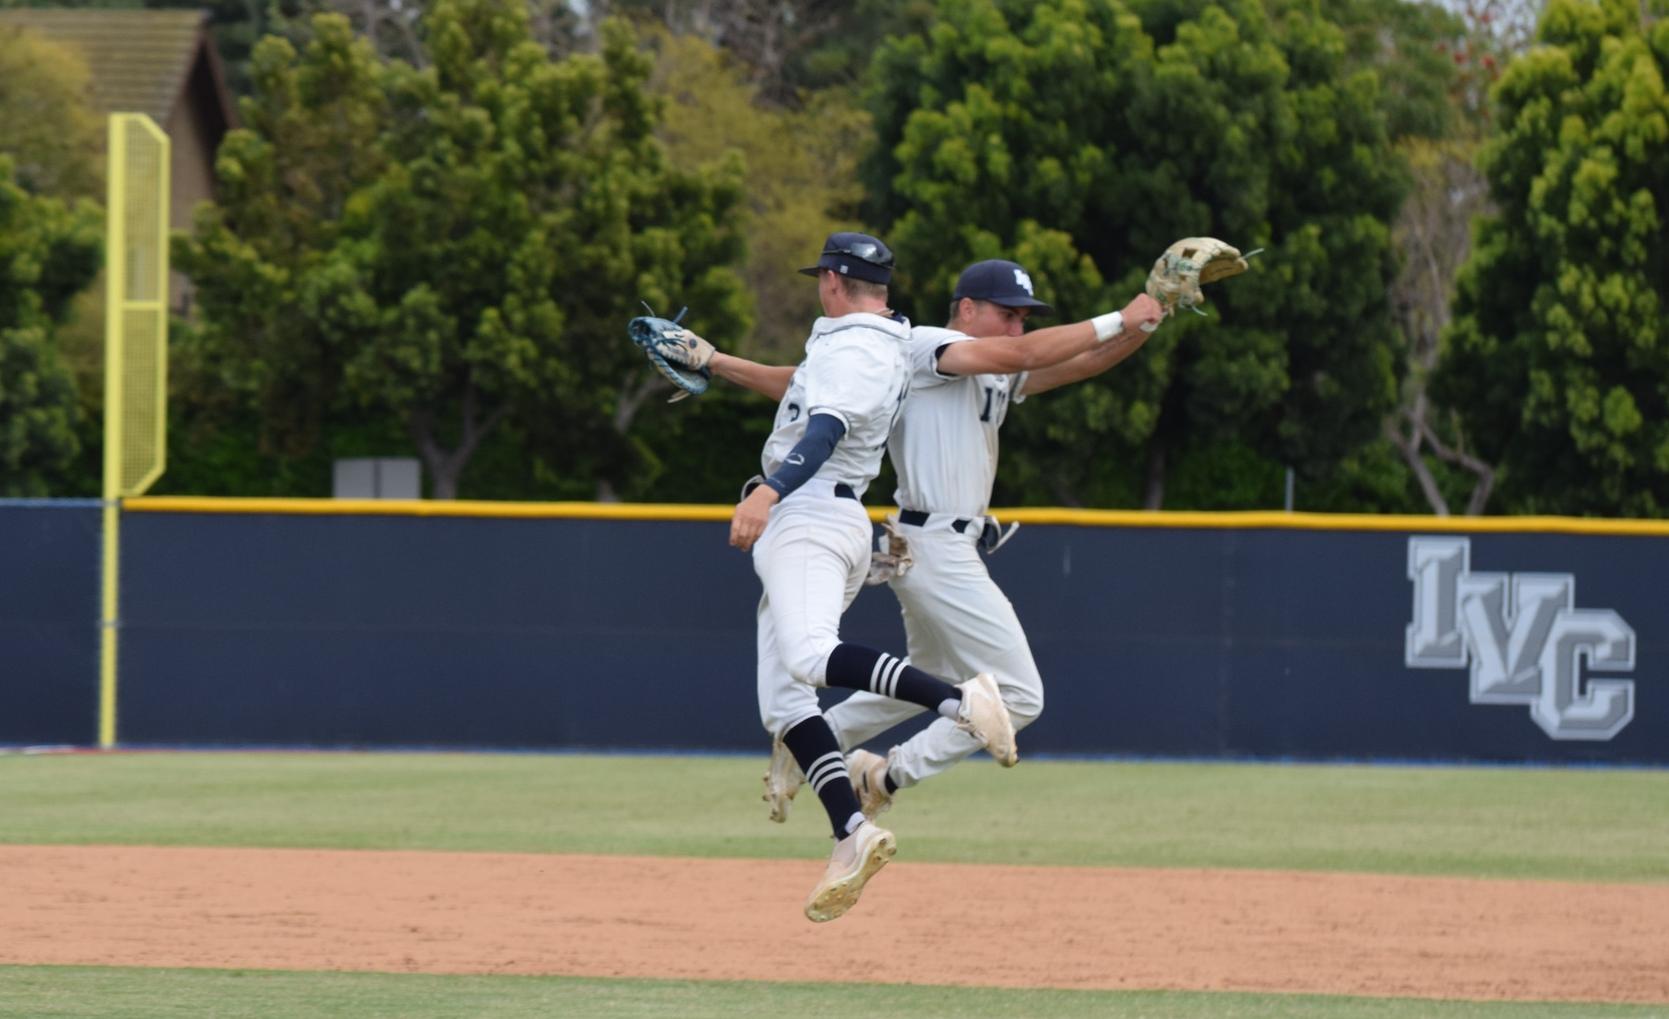 Baseball team scores 3-2 victory, wins the series over Fullerton